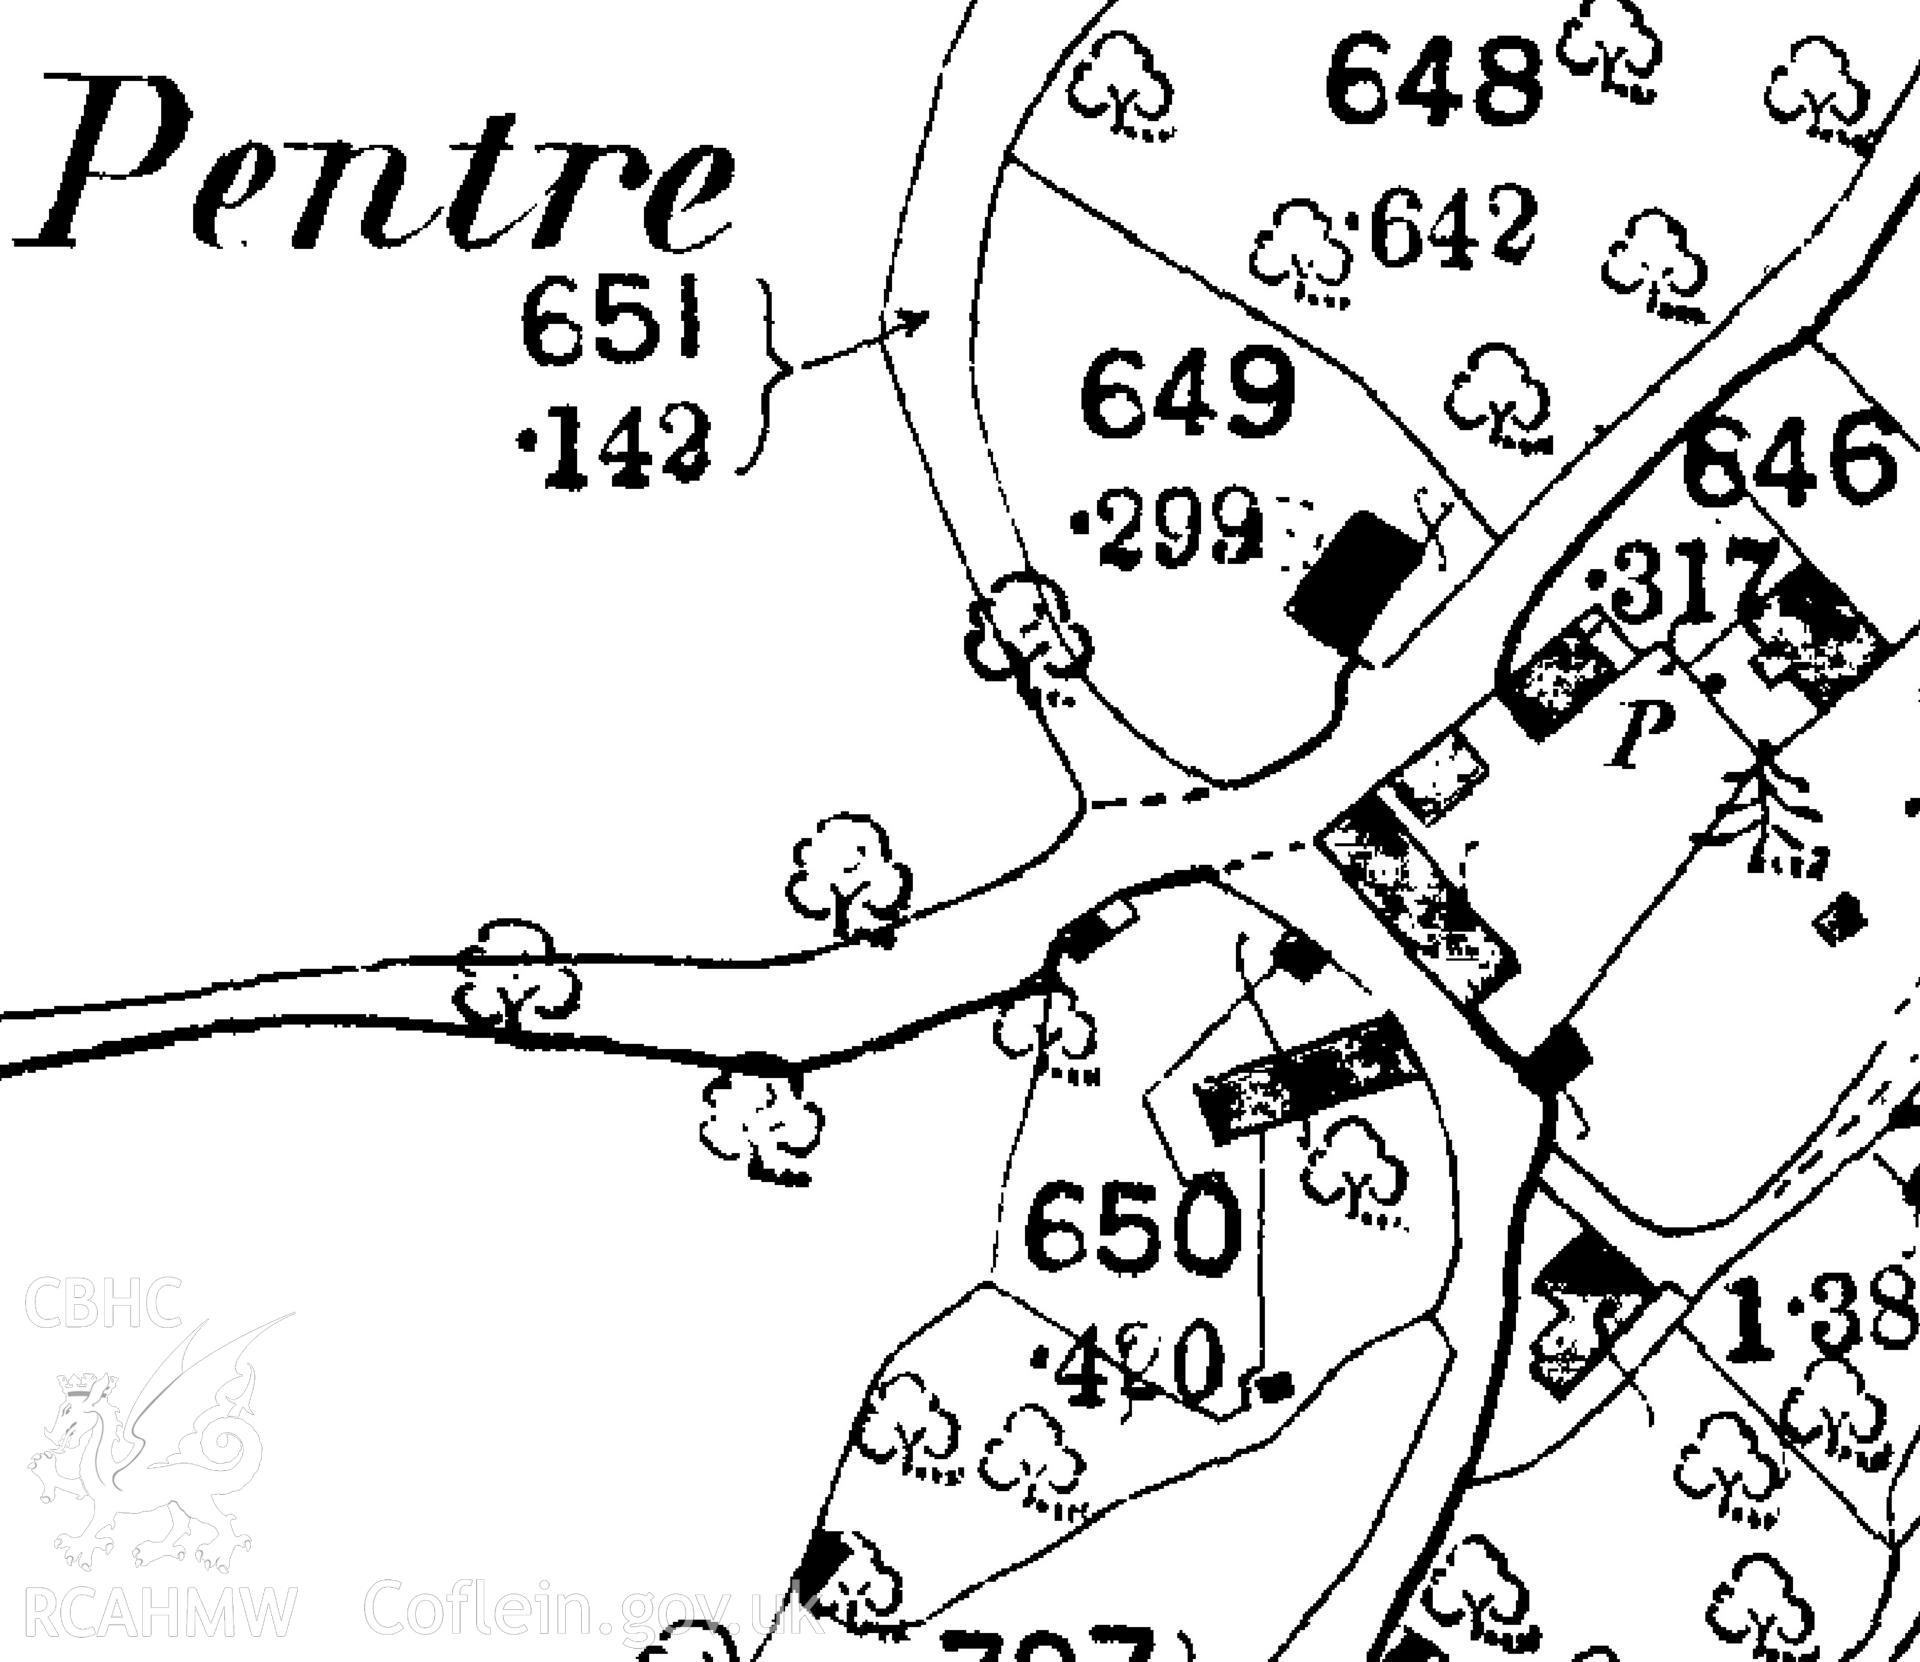 1886 Ordnance Survey map used as report illustration for CPAT Project 2414: Pentre Barns, Llandyssil, Powys - Building Survey. Prepared by Kate Pack of Clwyd Powys Archaeological Trust, 2019. Report no. 1694.